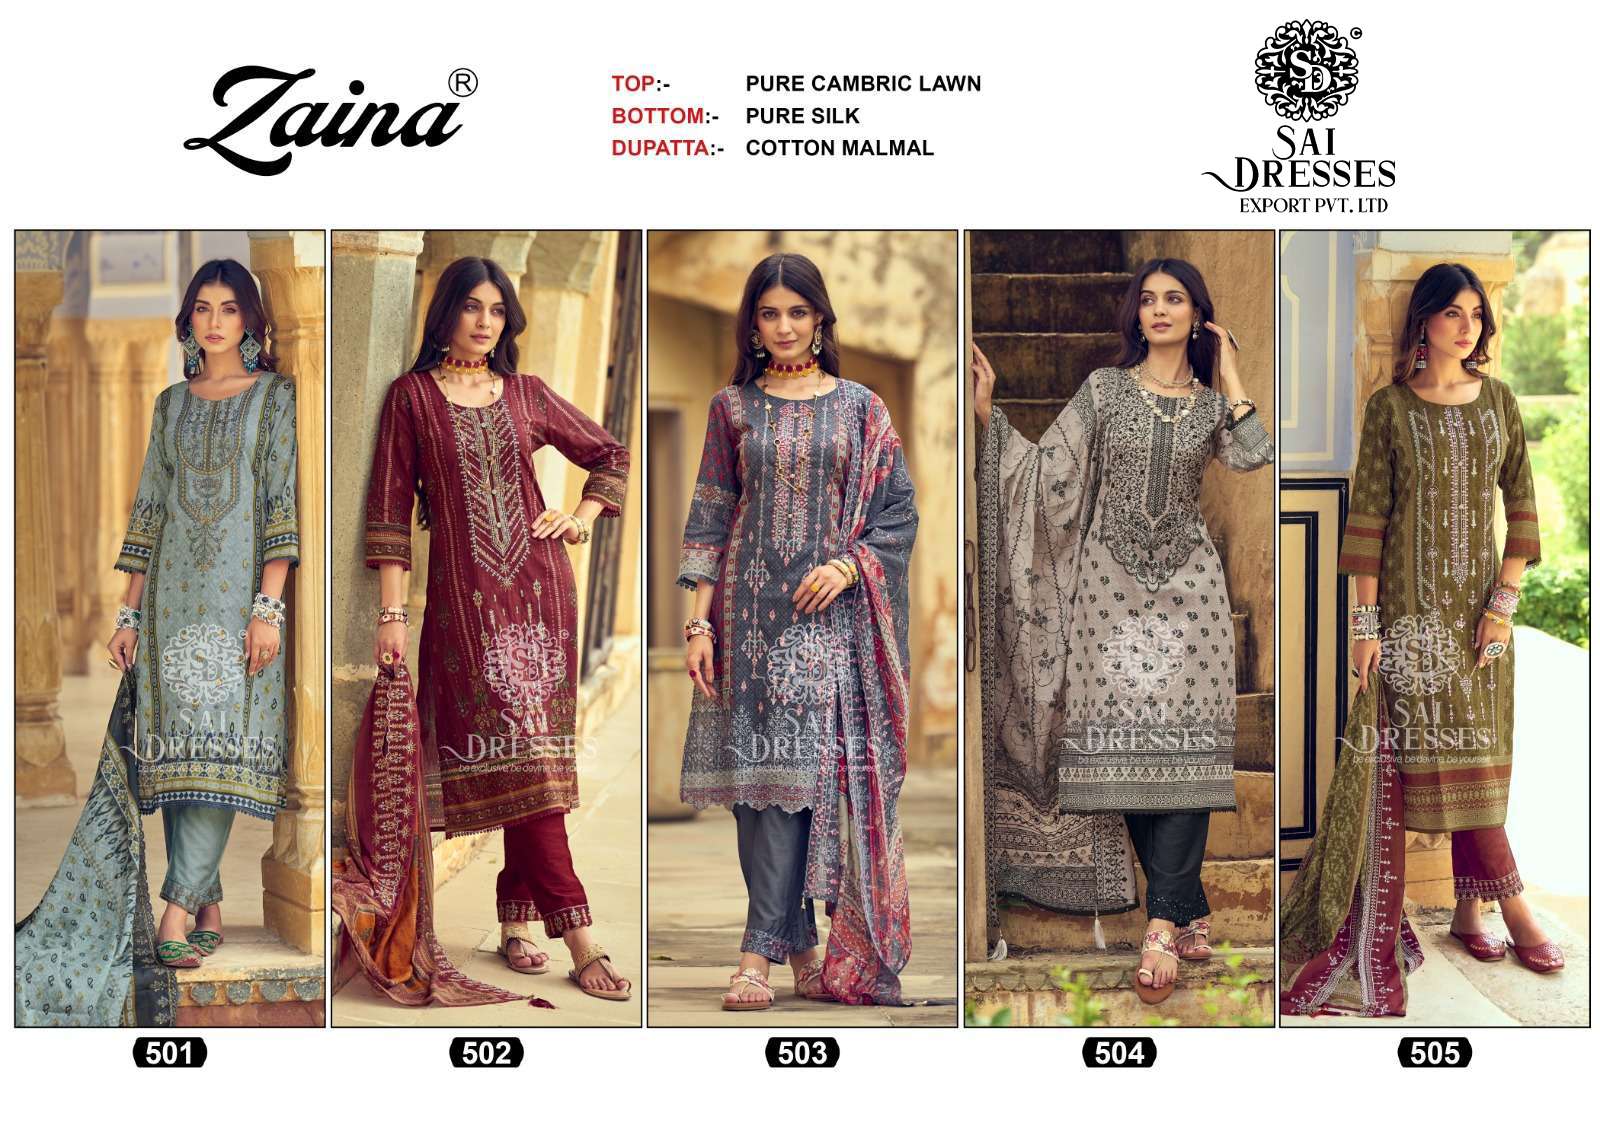 SAI DRESSES PRESENT ZAINA READY TO WEAR PANT STYLE EMBROIDERED PAKISTANI SALWAR SUITS IN WHOLESALE RATE IN SURAT